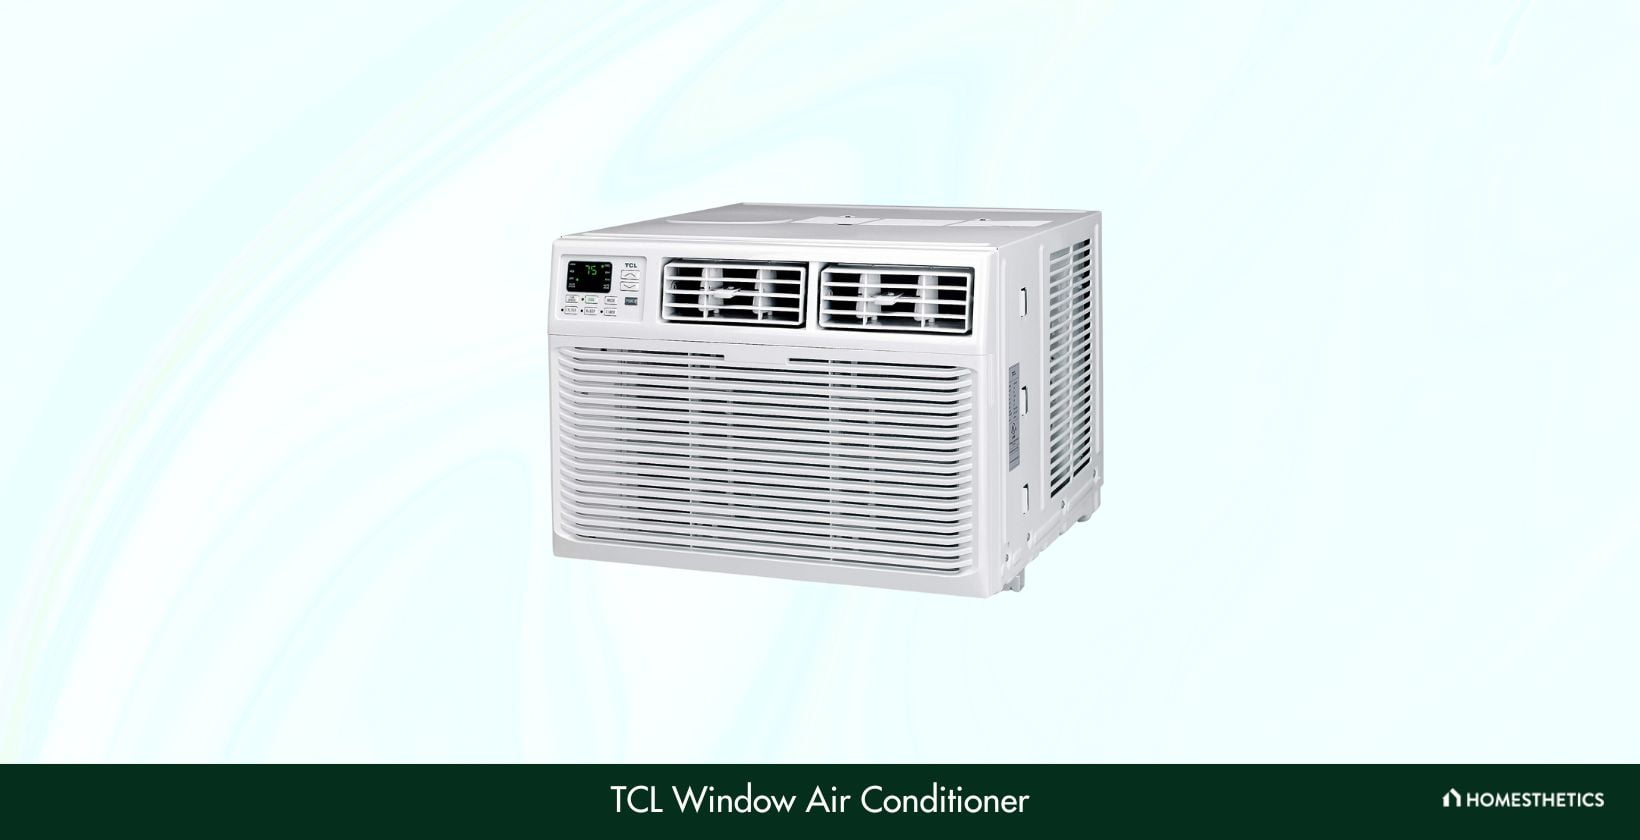 TCL Window Air Conditioner 1